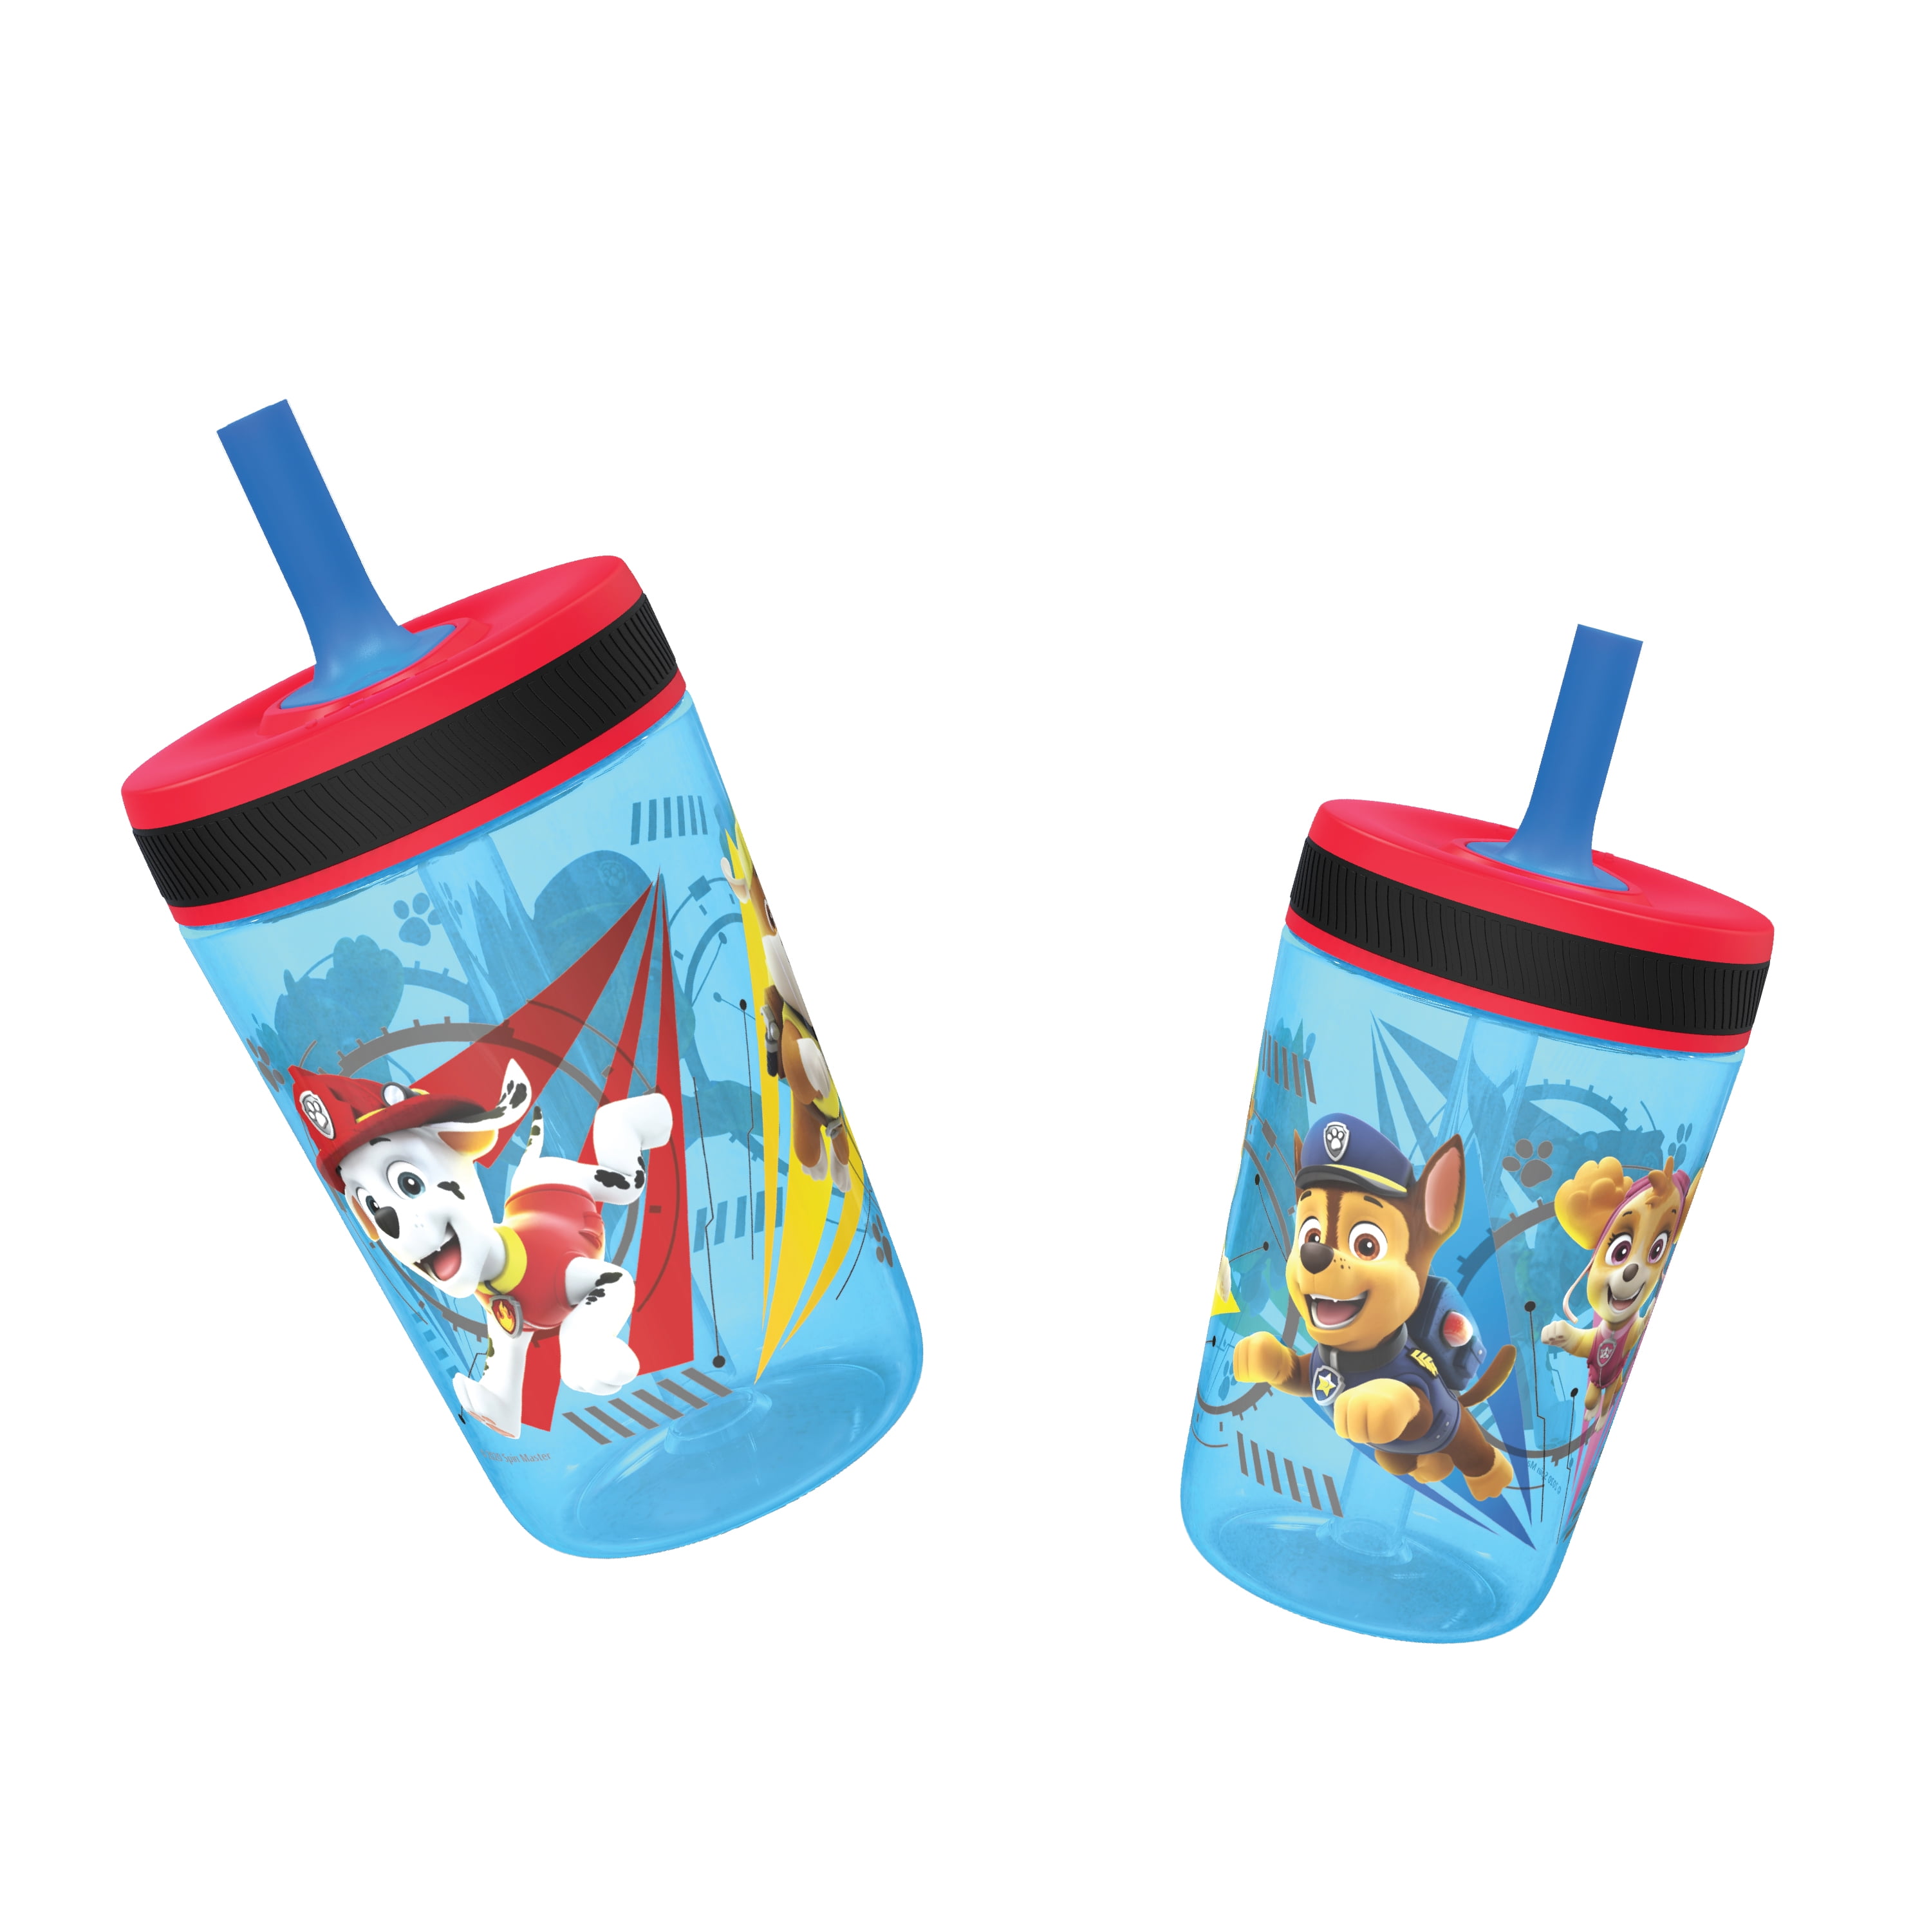 Toy Story Fun Floats Tumbler Cup with Lid and Straw by Zak Designs – Bling  Your Cake